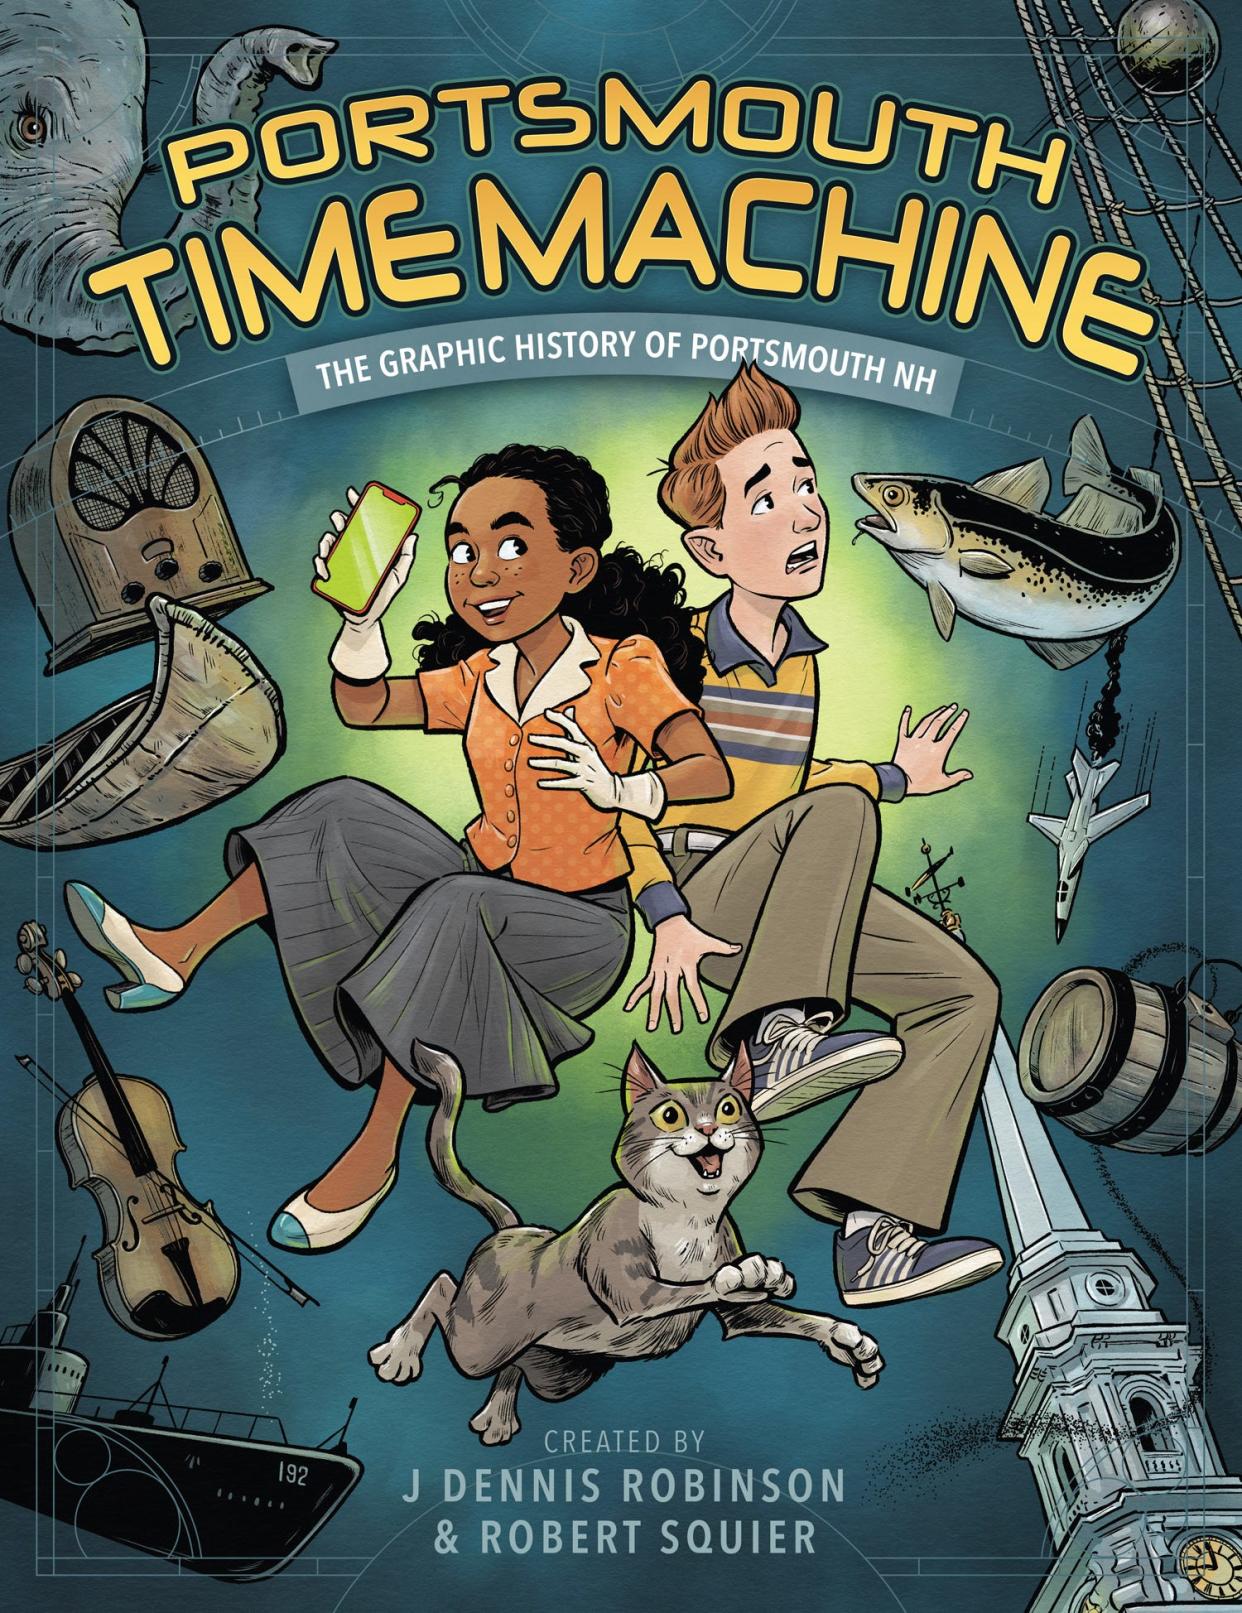 The first-ever graphic history of the city, Portsmouth Time Machine, will launch at Portsmouth Historical Society the evening of June 28. The 32-page full-color comic for young readers was inspired by the city's 400th anniversary celebration.